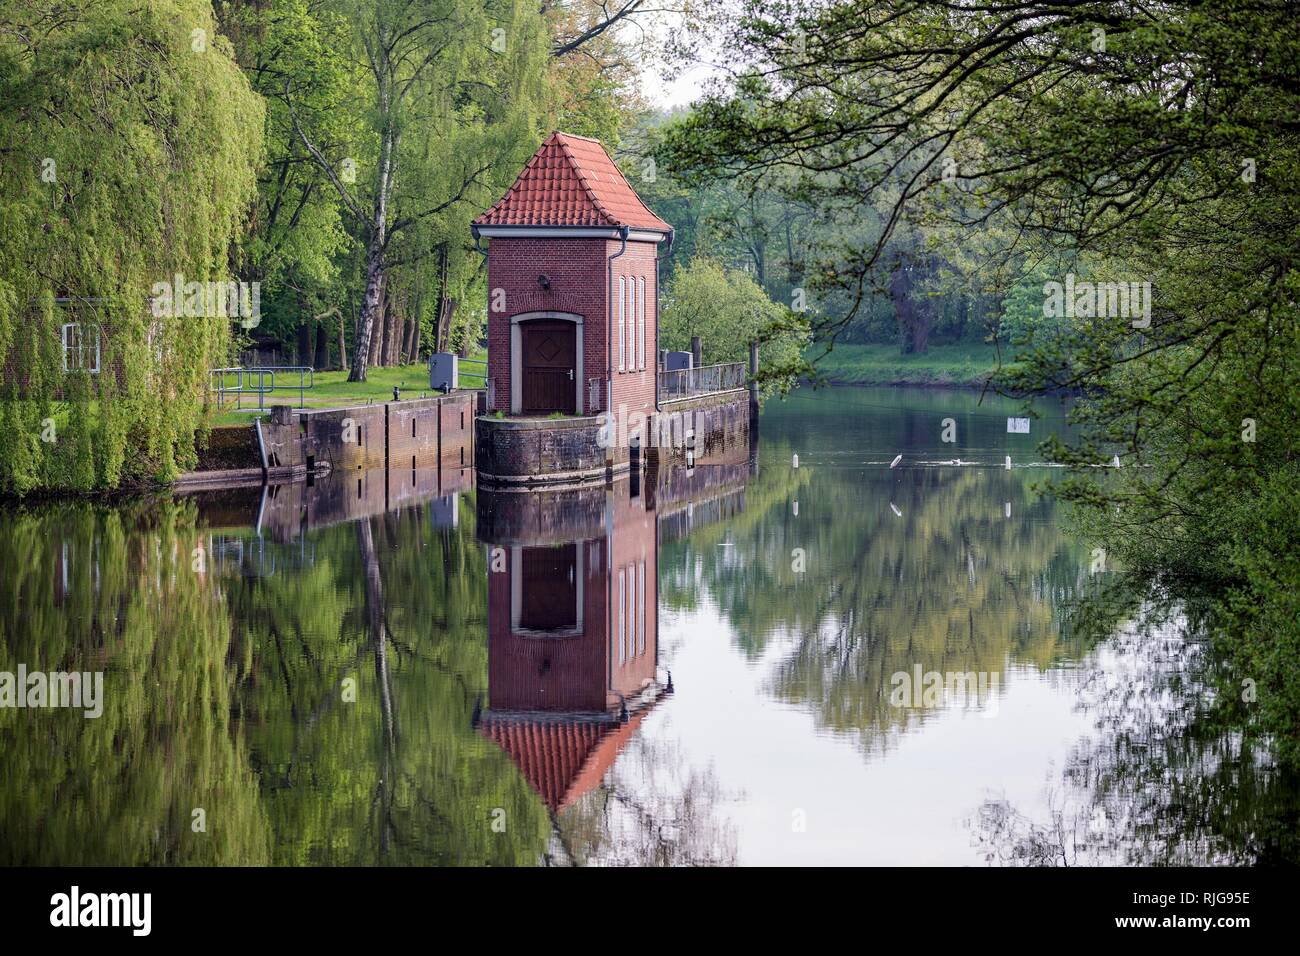 Oste Weir with historical lockkeeper's house at the Oste, Bremervörde, Lower Saxony, Germany Stock Photo